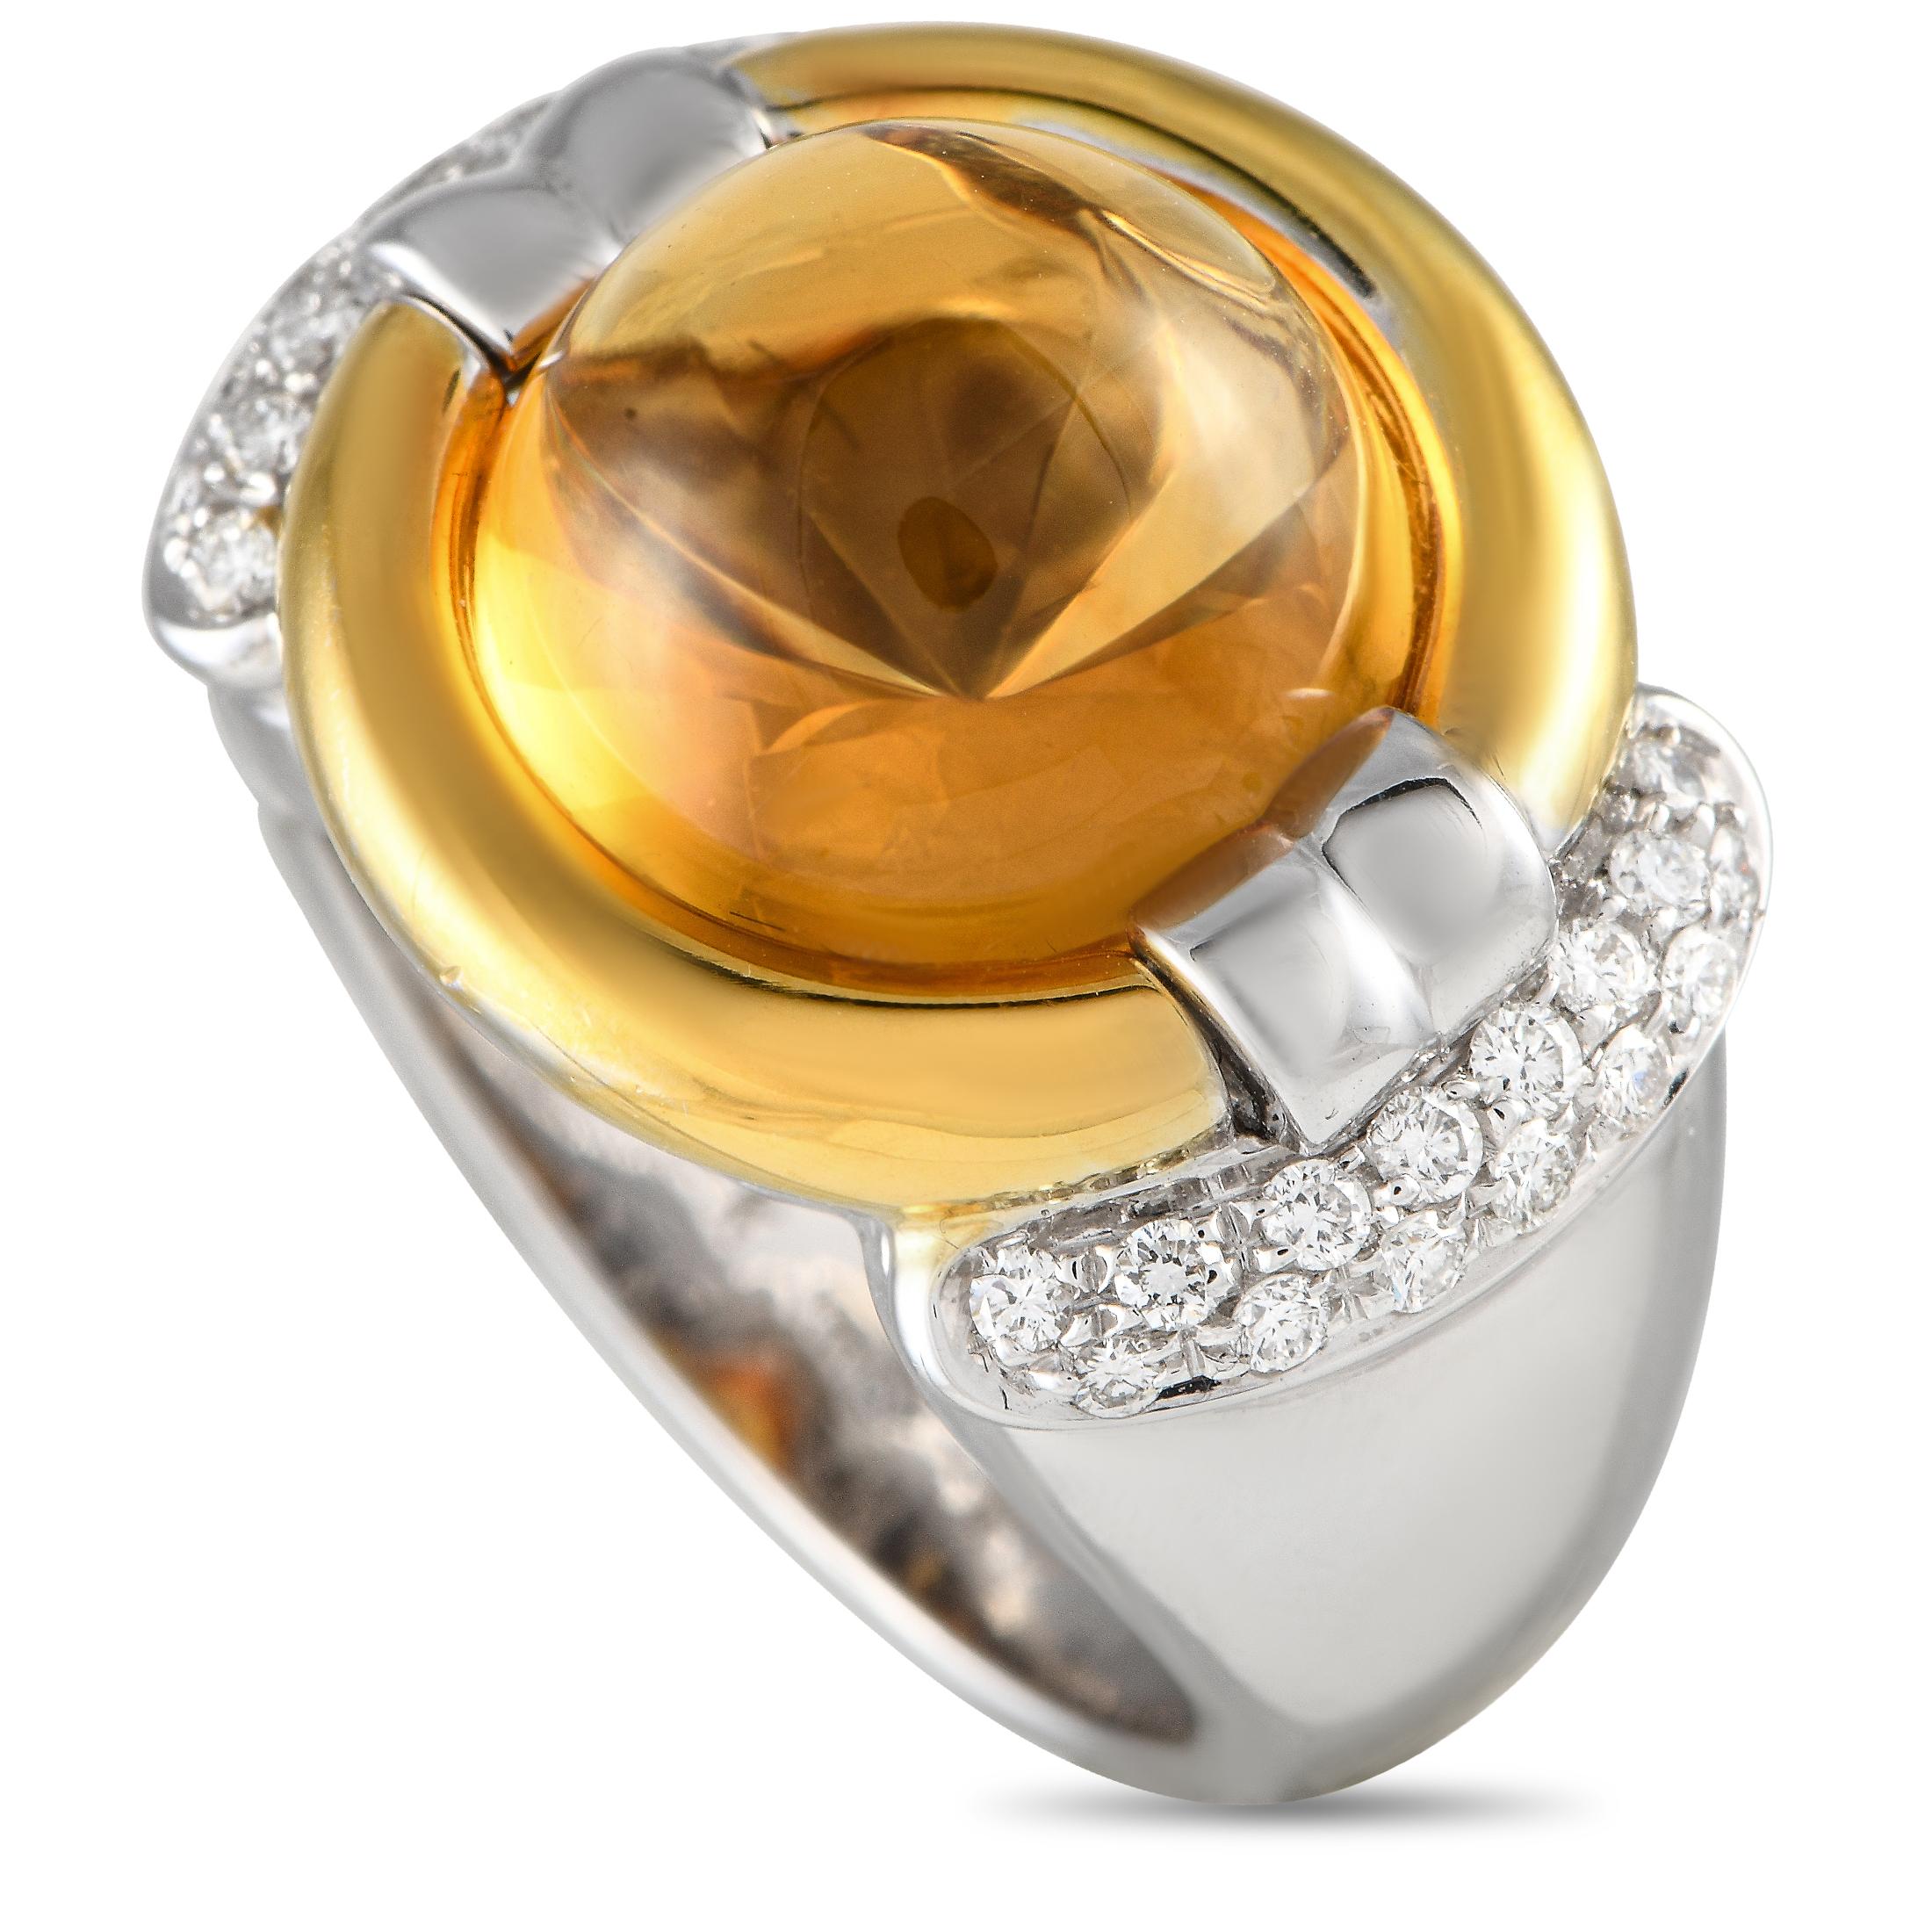 18K White Gold 0.50ct Diamond and Citrine Cocktail Ring mf12-012424 In Excellent Condition For Sale In Southampton, PA